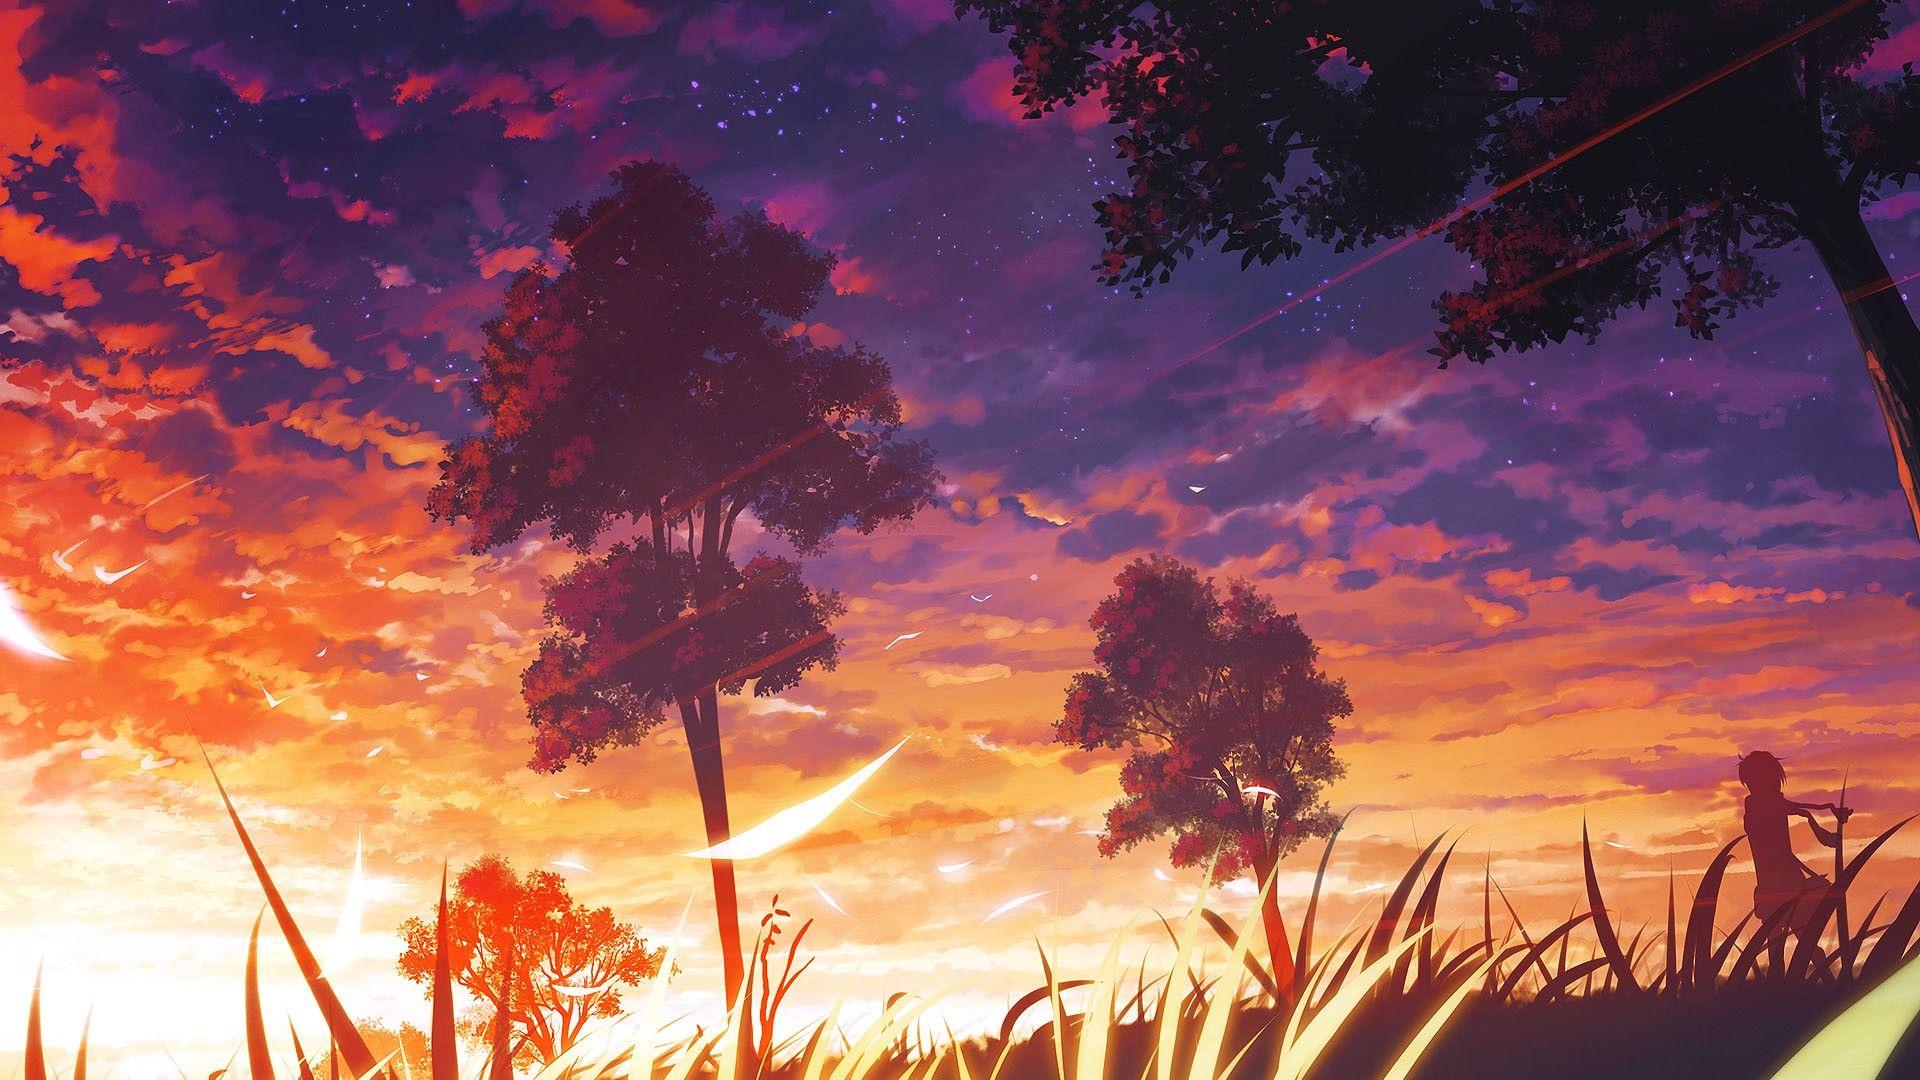 Anime Scenery Wallpaper Desktop Background with High Definition